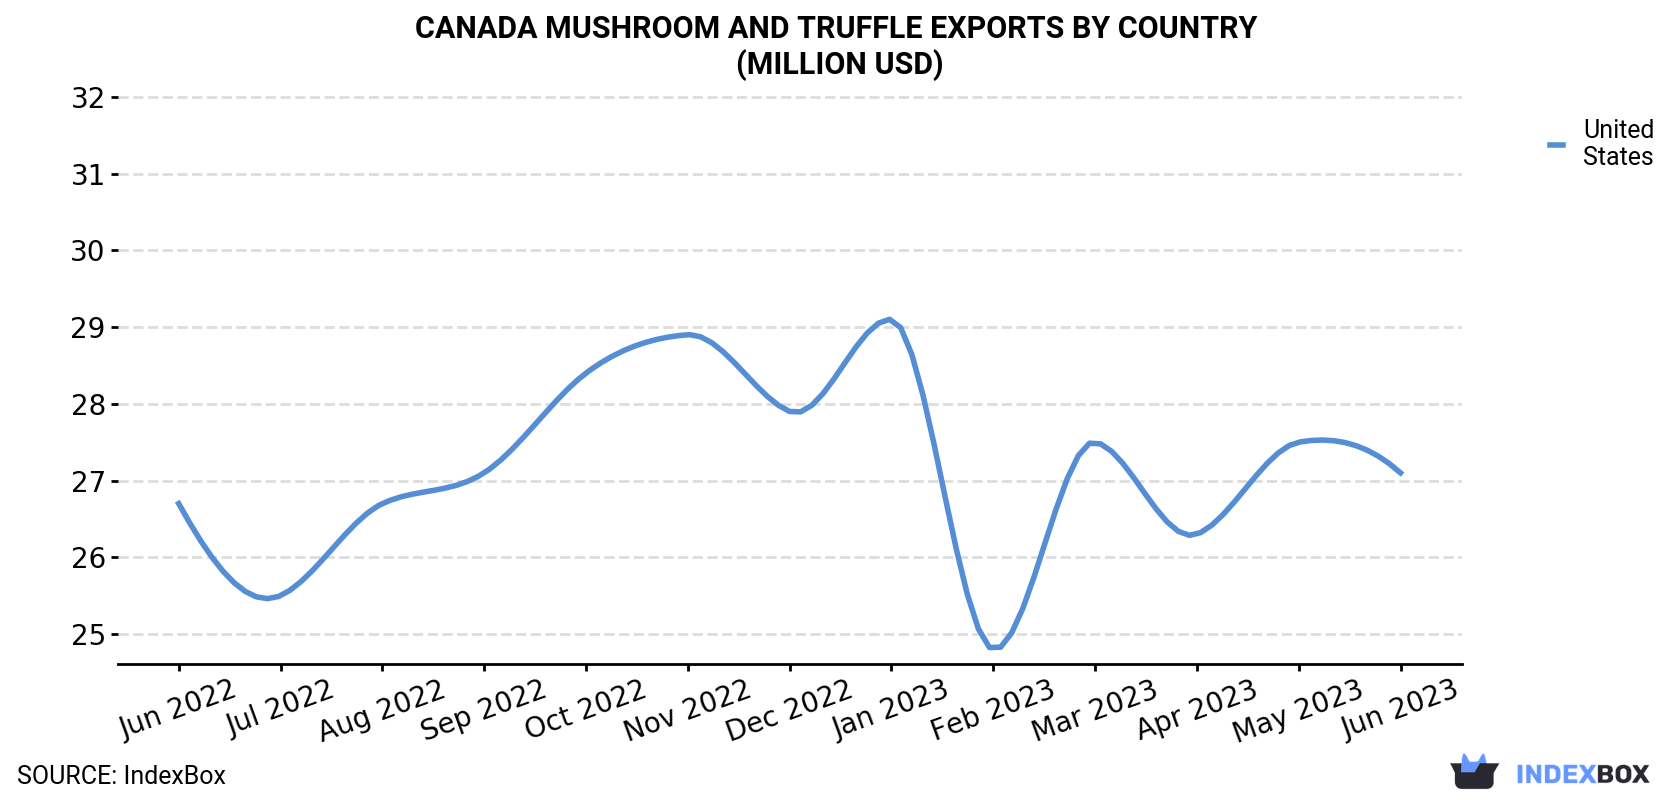 Canada Mushroom And Truffle Exports By Country (Million USD)